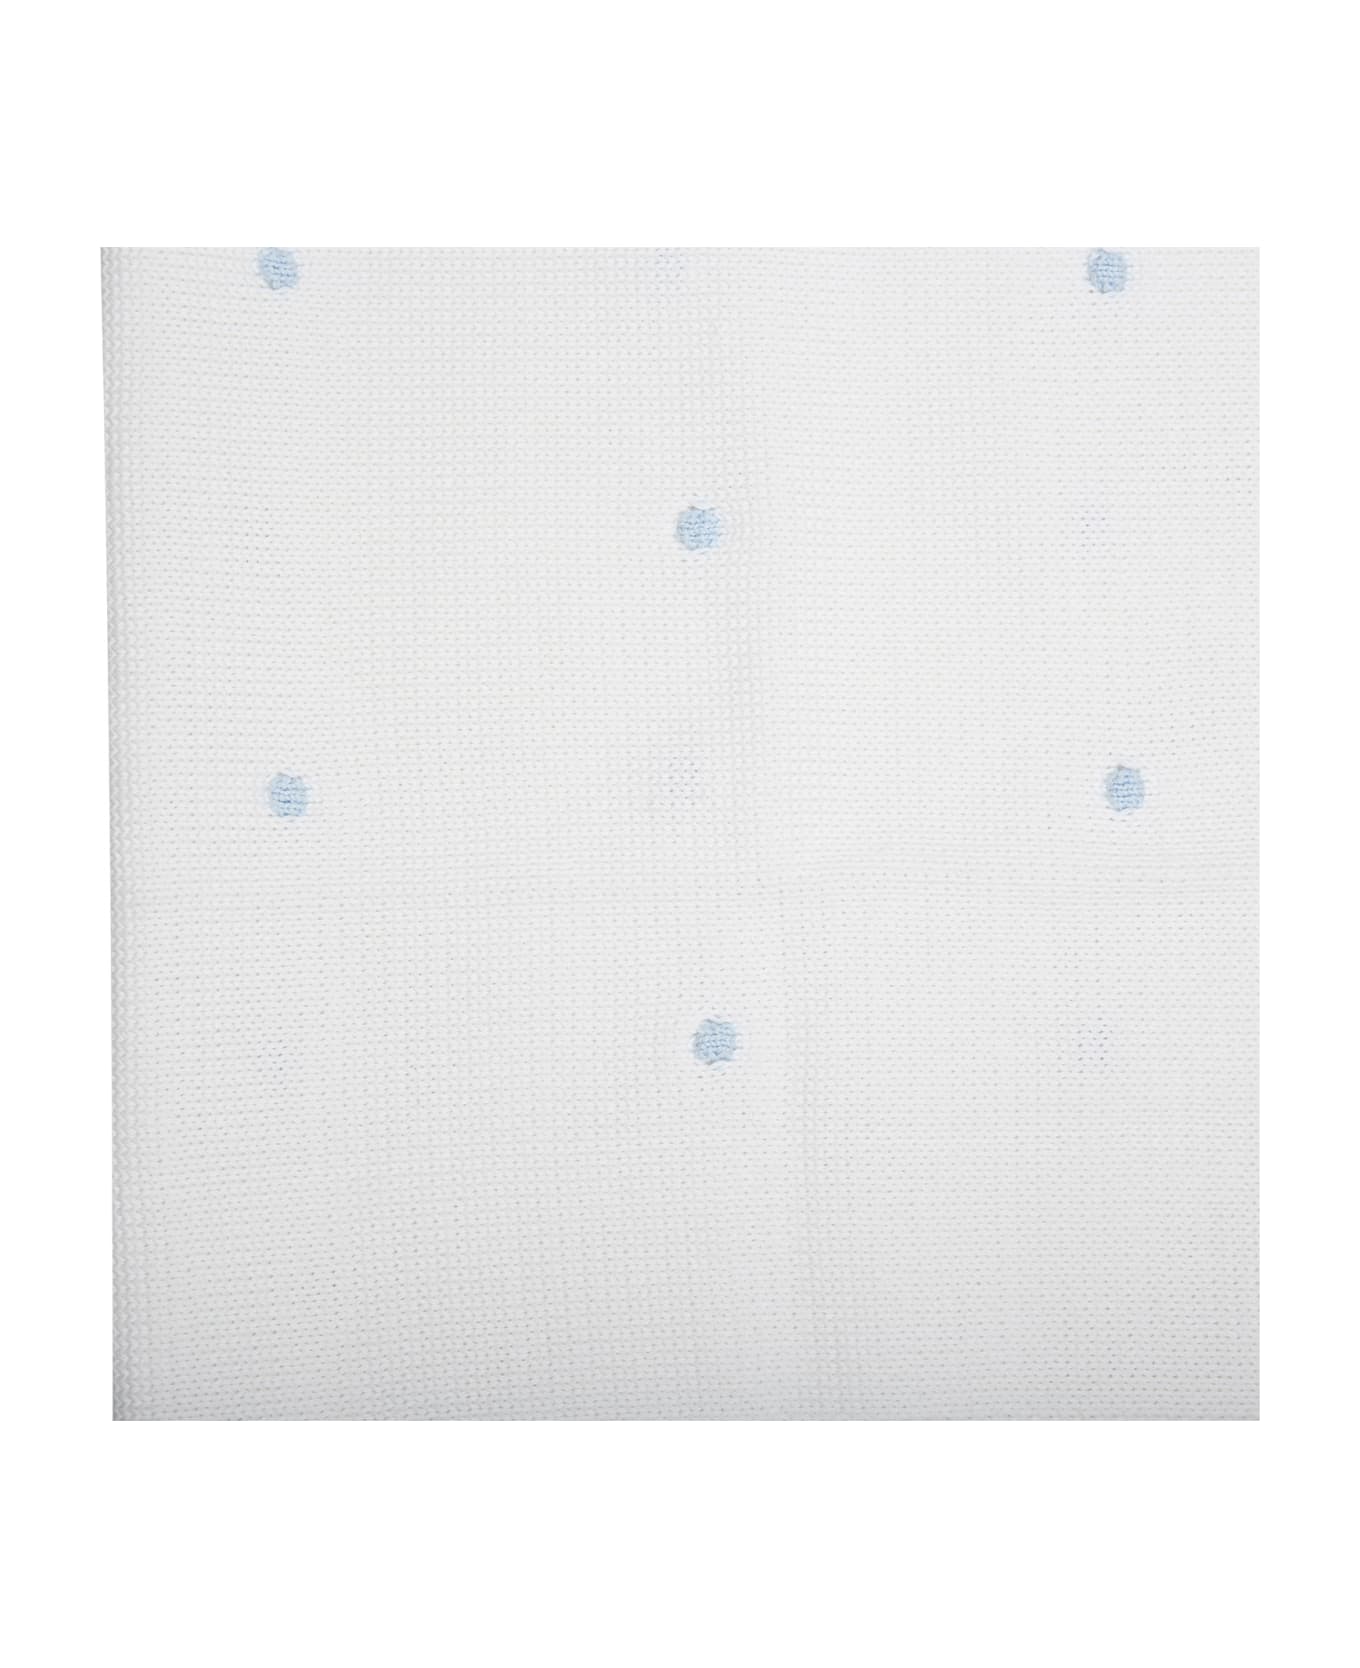 Little Bear White Baby Blanket For Baby Boy With Sky Blue Polka Dots - White